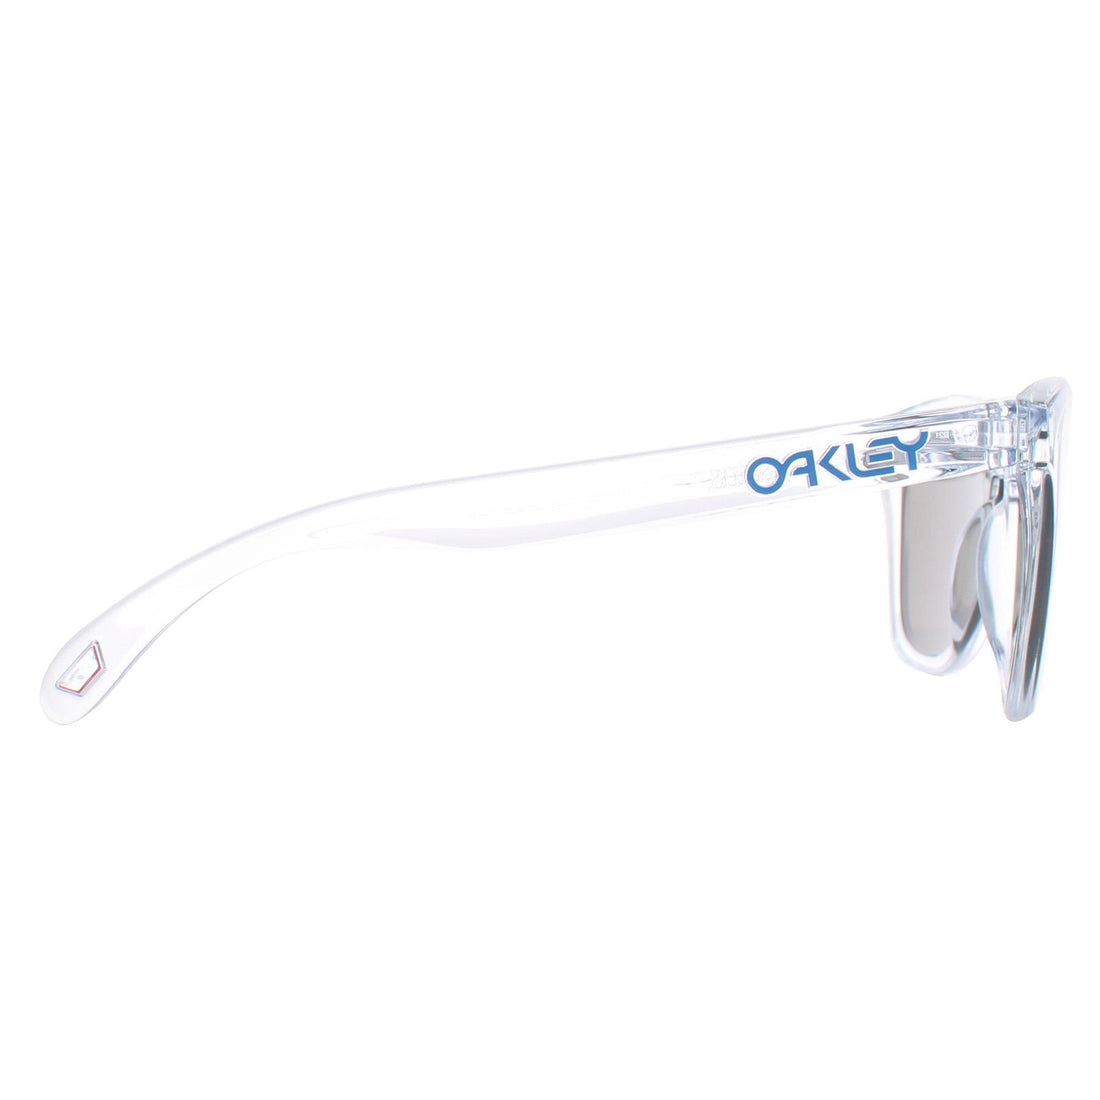 Oakley Sunglasses Frogskins OO9013-D0 Crystal Clear Prizm Sapphire